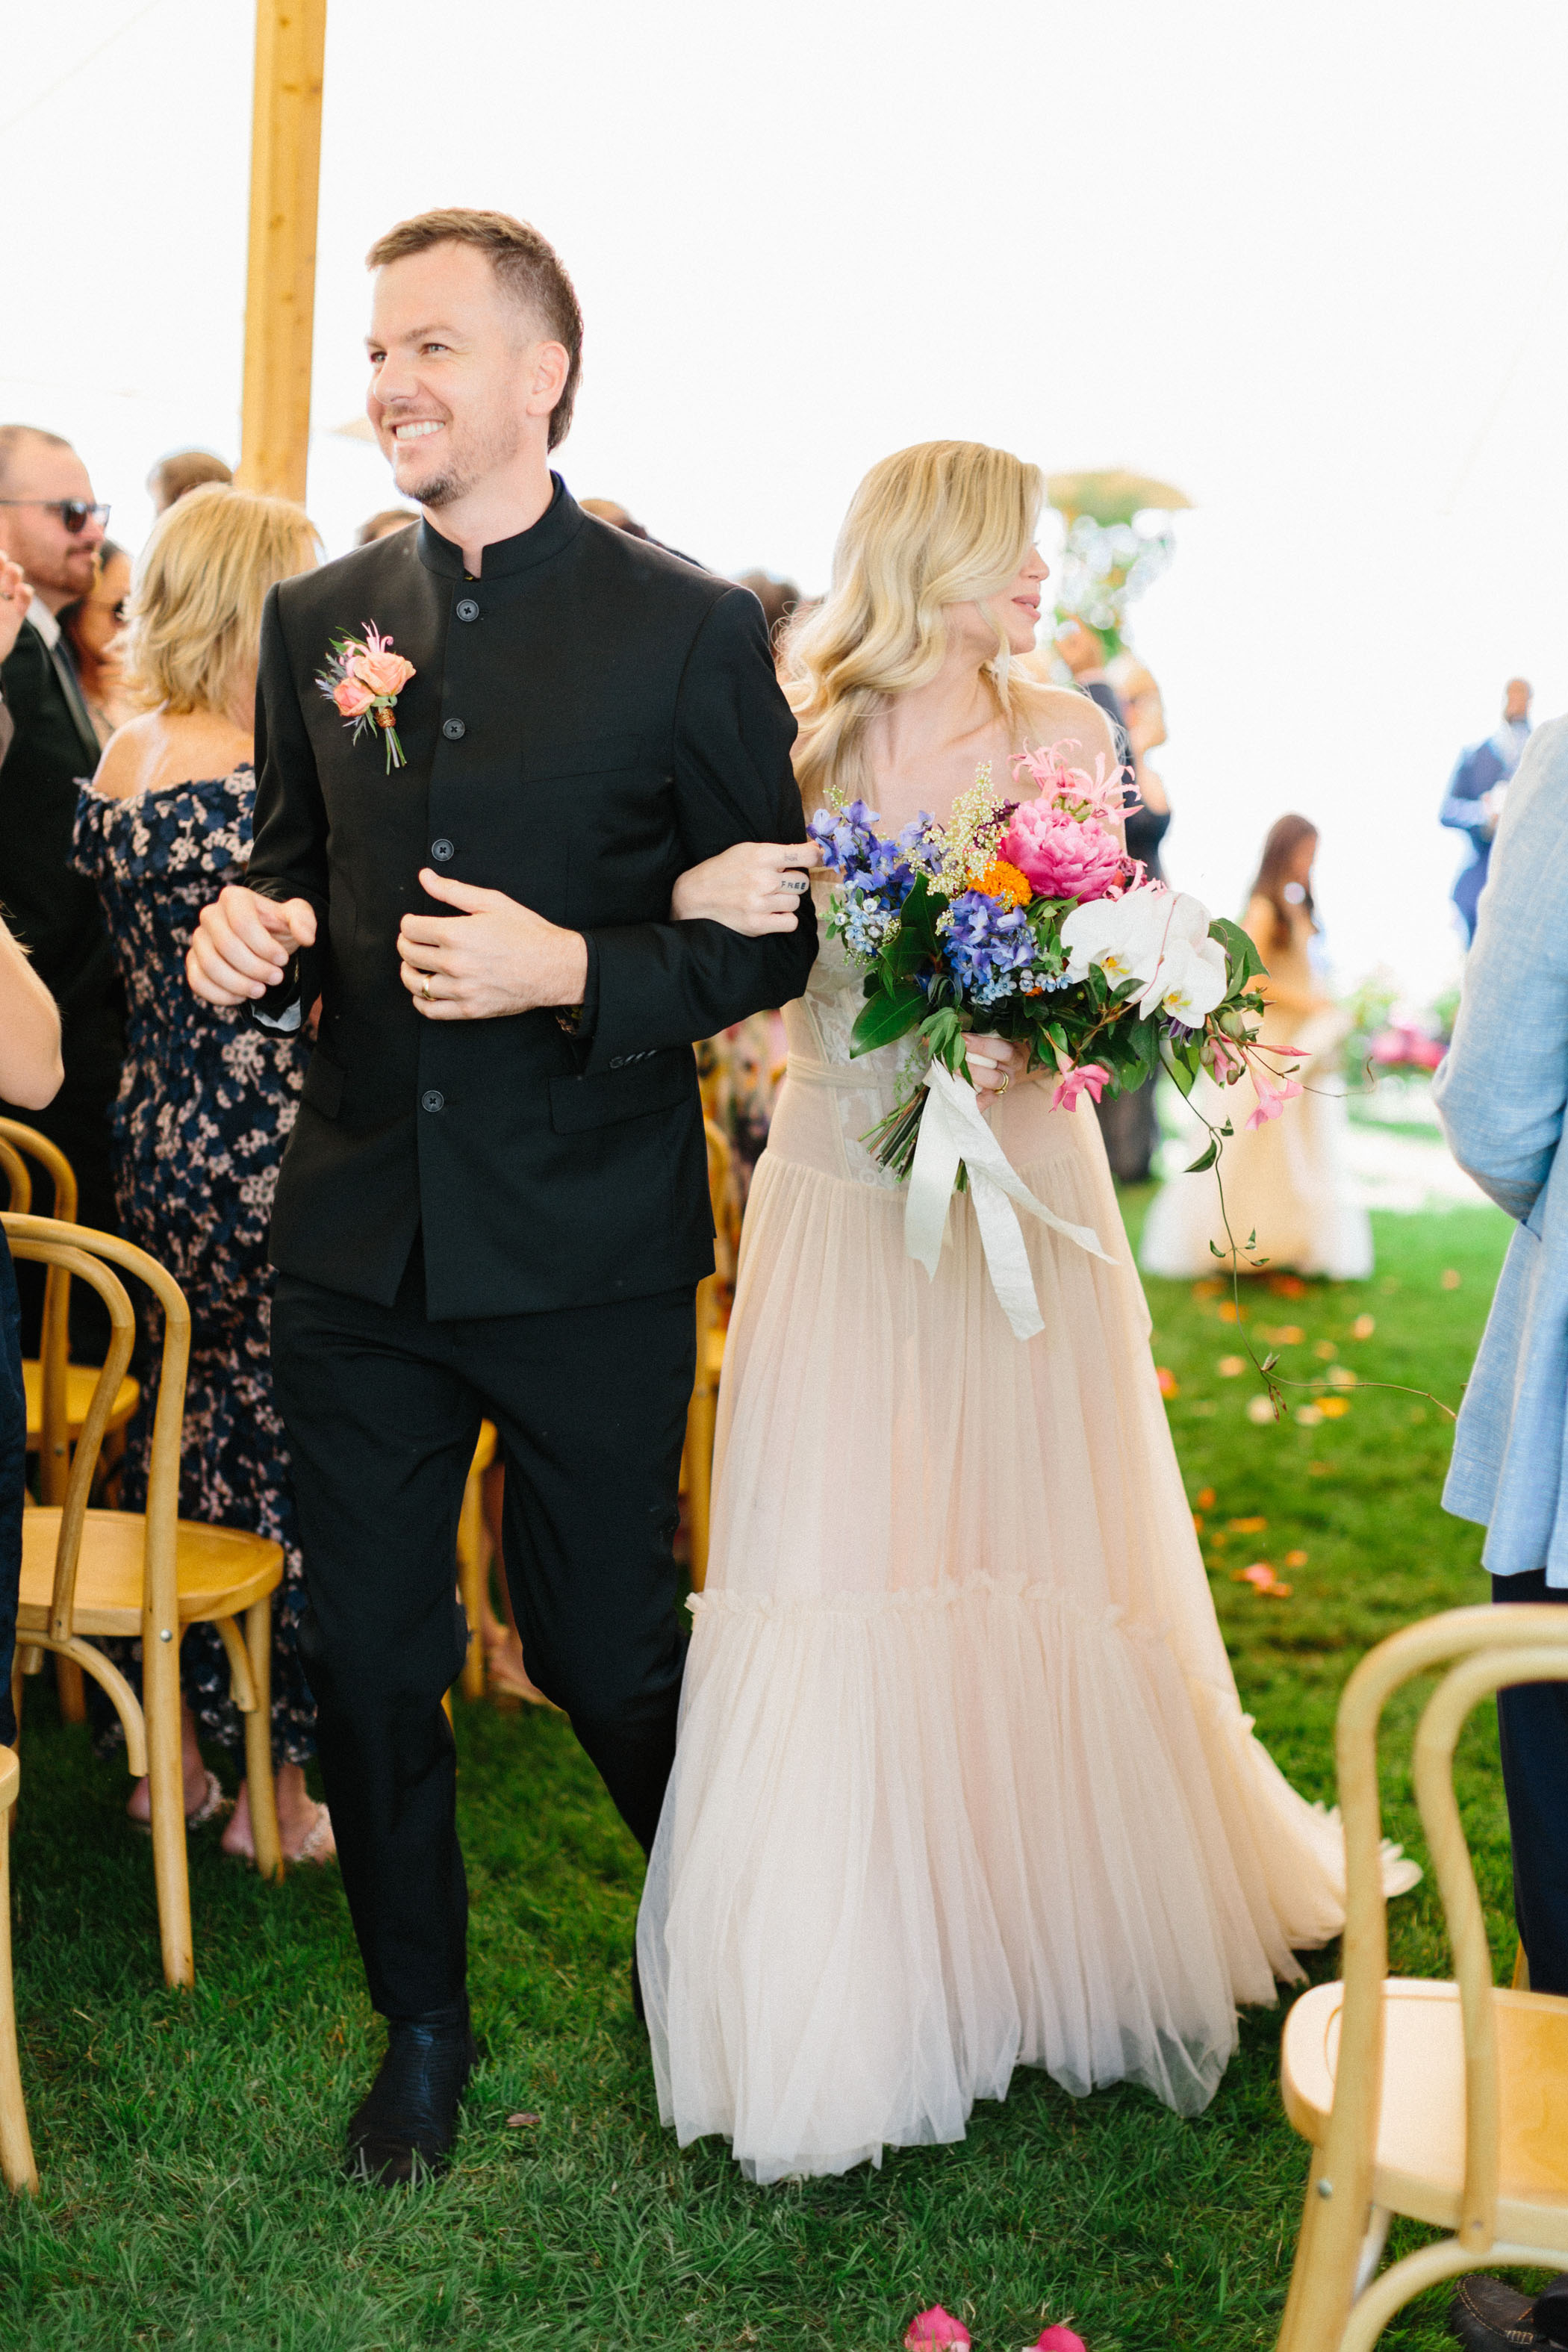 A Celebrity Lakeside Wedding in Wisconsin with a Transformed Boathouse